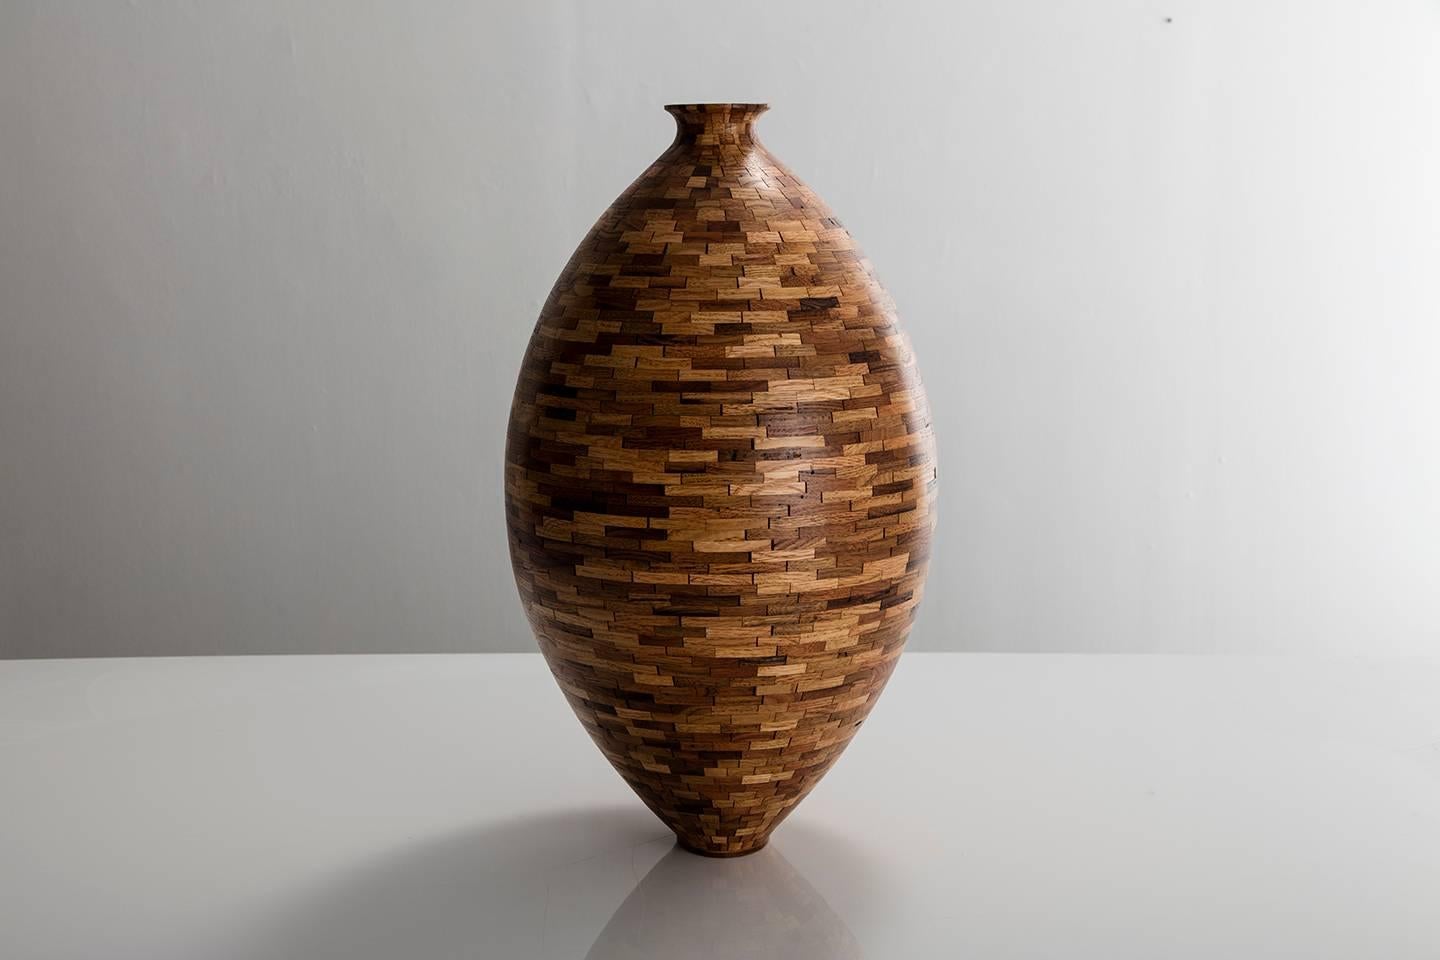 Part of Richard Haining's Stacked Collection, this asymmetrical vessel utilizes reclaimed red and white oak, as well as chestnut. The salvaged wood offcuts were sourced from a variety of local Brooklyn wood shops, as well as from deconstructed turn